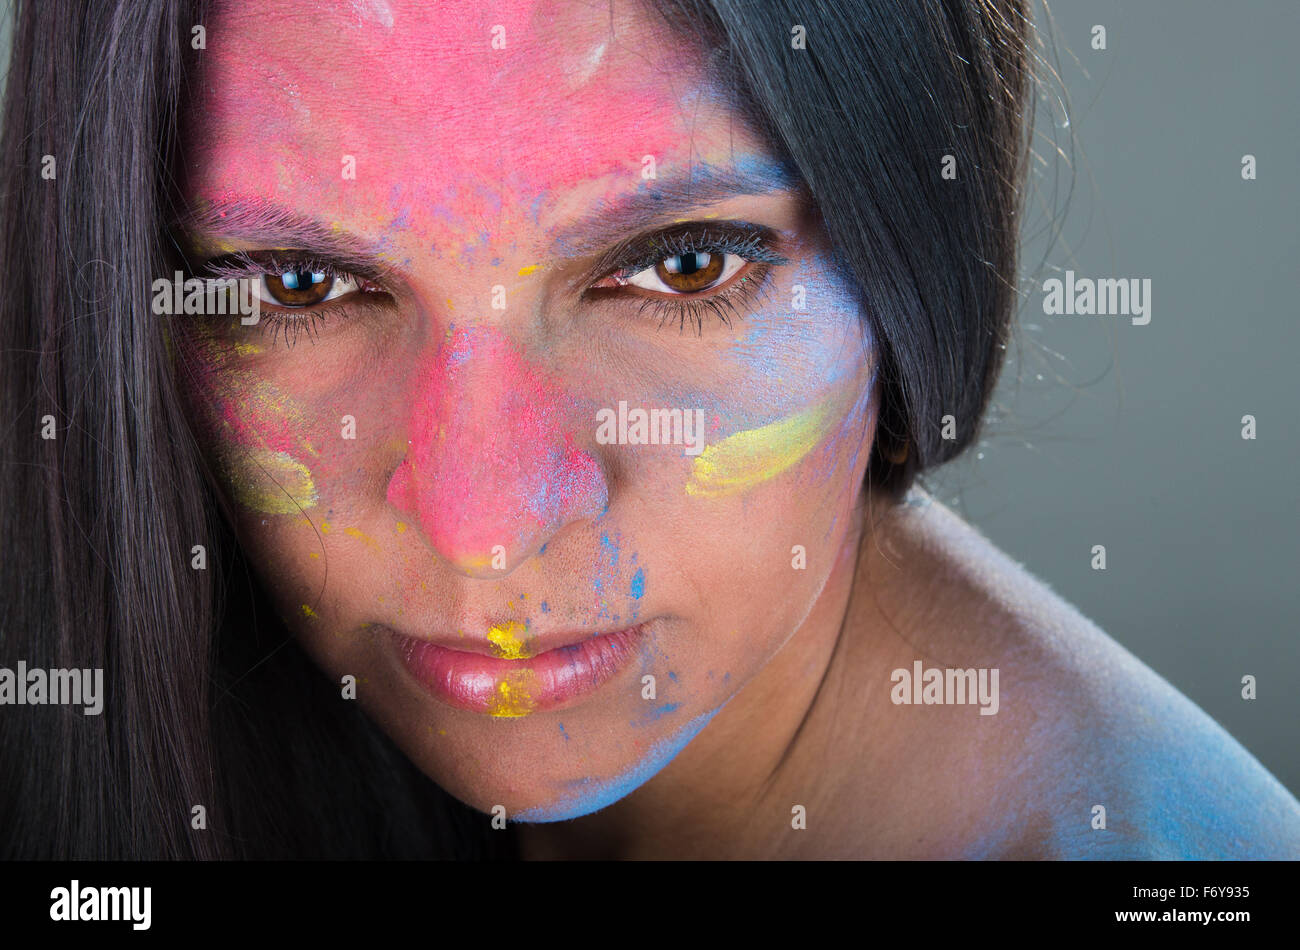 Closeup portrait of latin girl with painted face Stock Photo